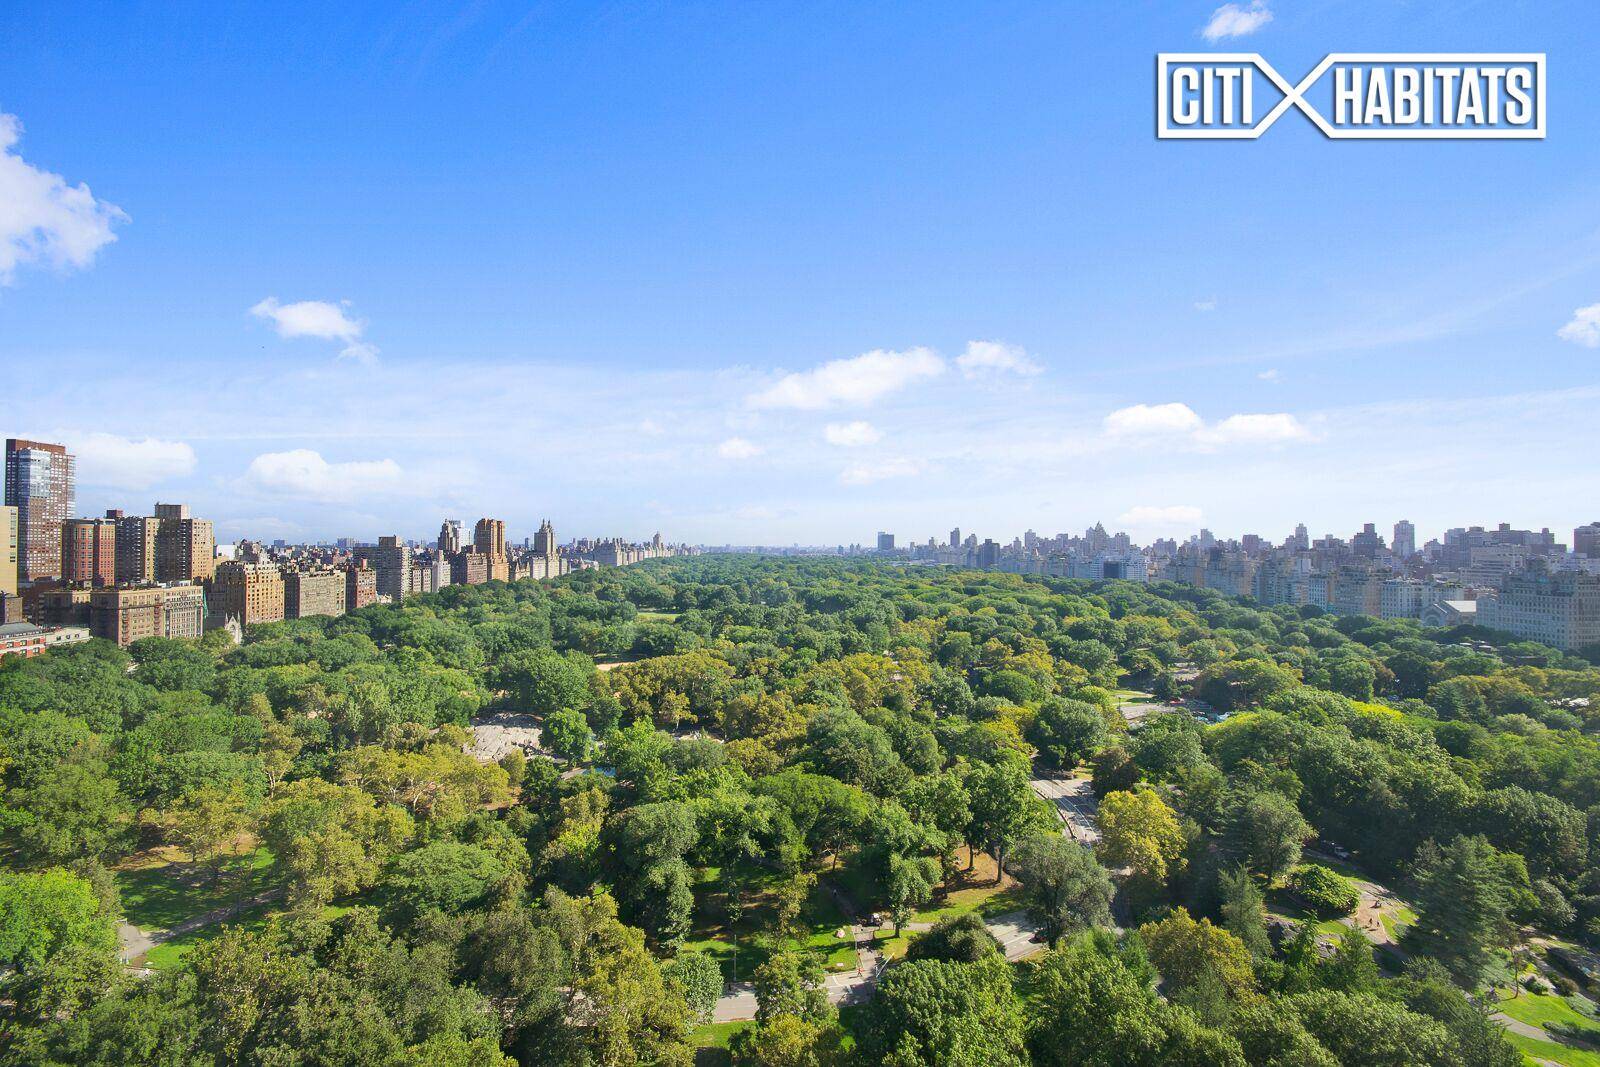 Enjoy breathtaking, unobstructed Central Park views from this amazing 2 bed 2 bath condominium perched high on the 25th floor of the historic Essex House.